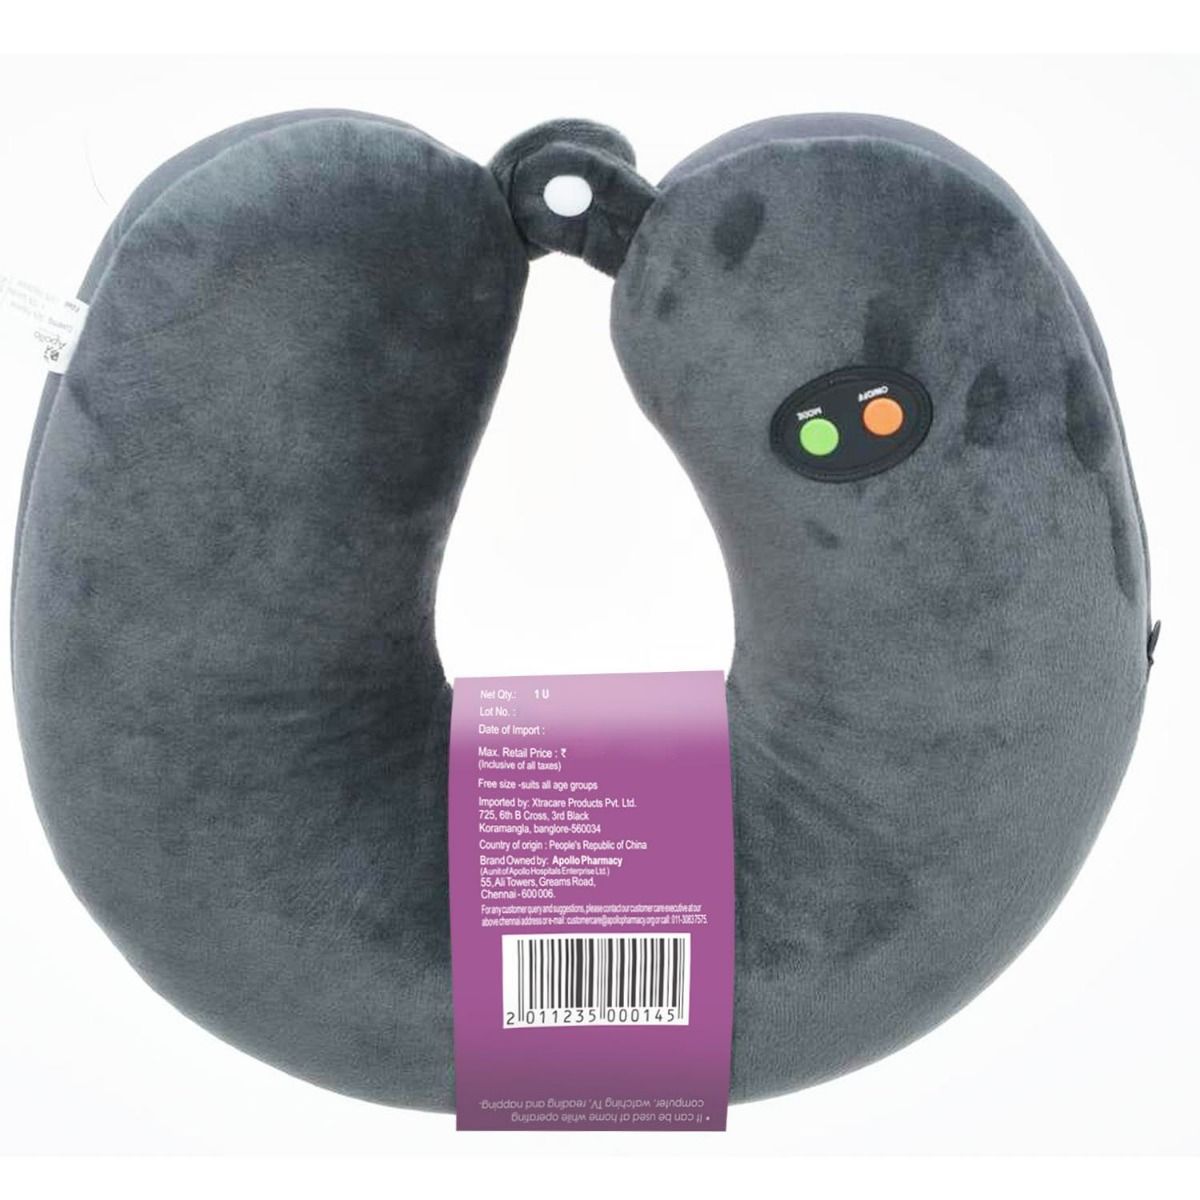 Apollo Pharmacy Travel Neck Pillow with Massager, 1 Count, Pack of 1 